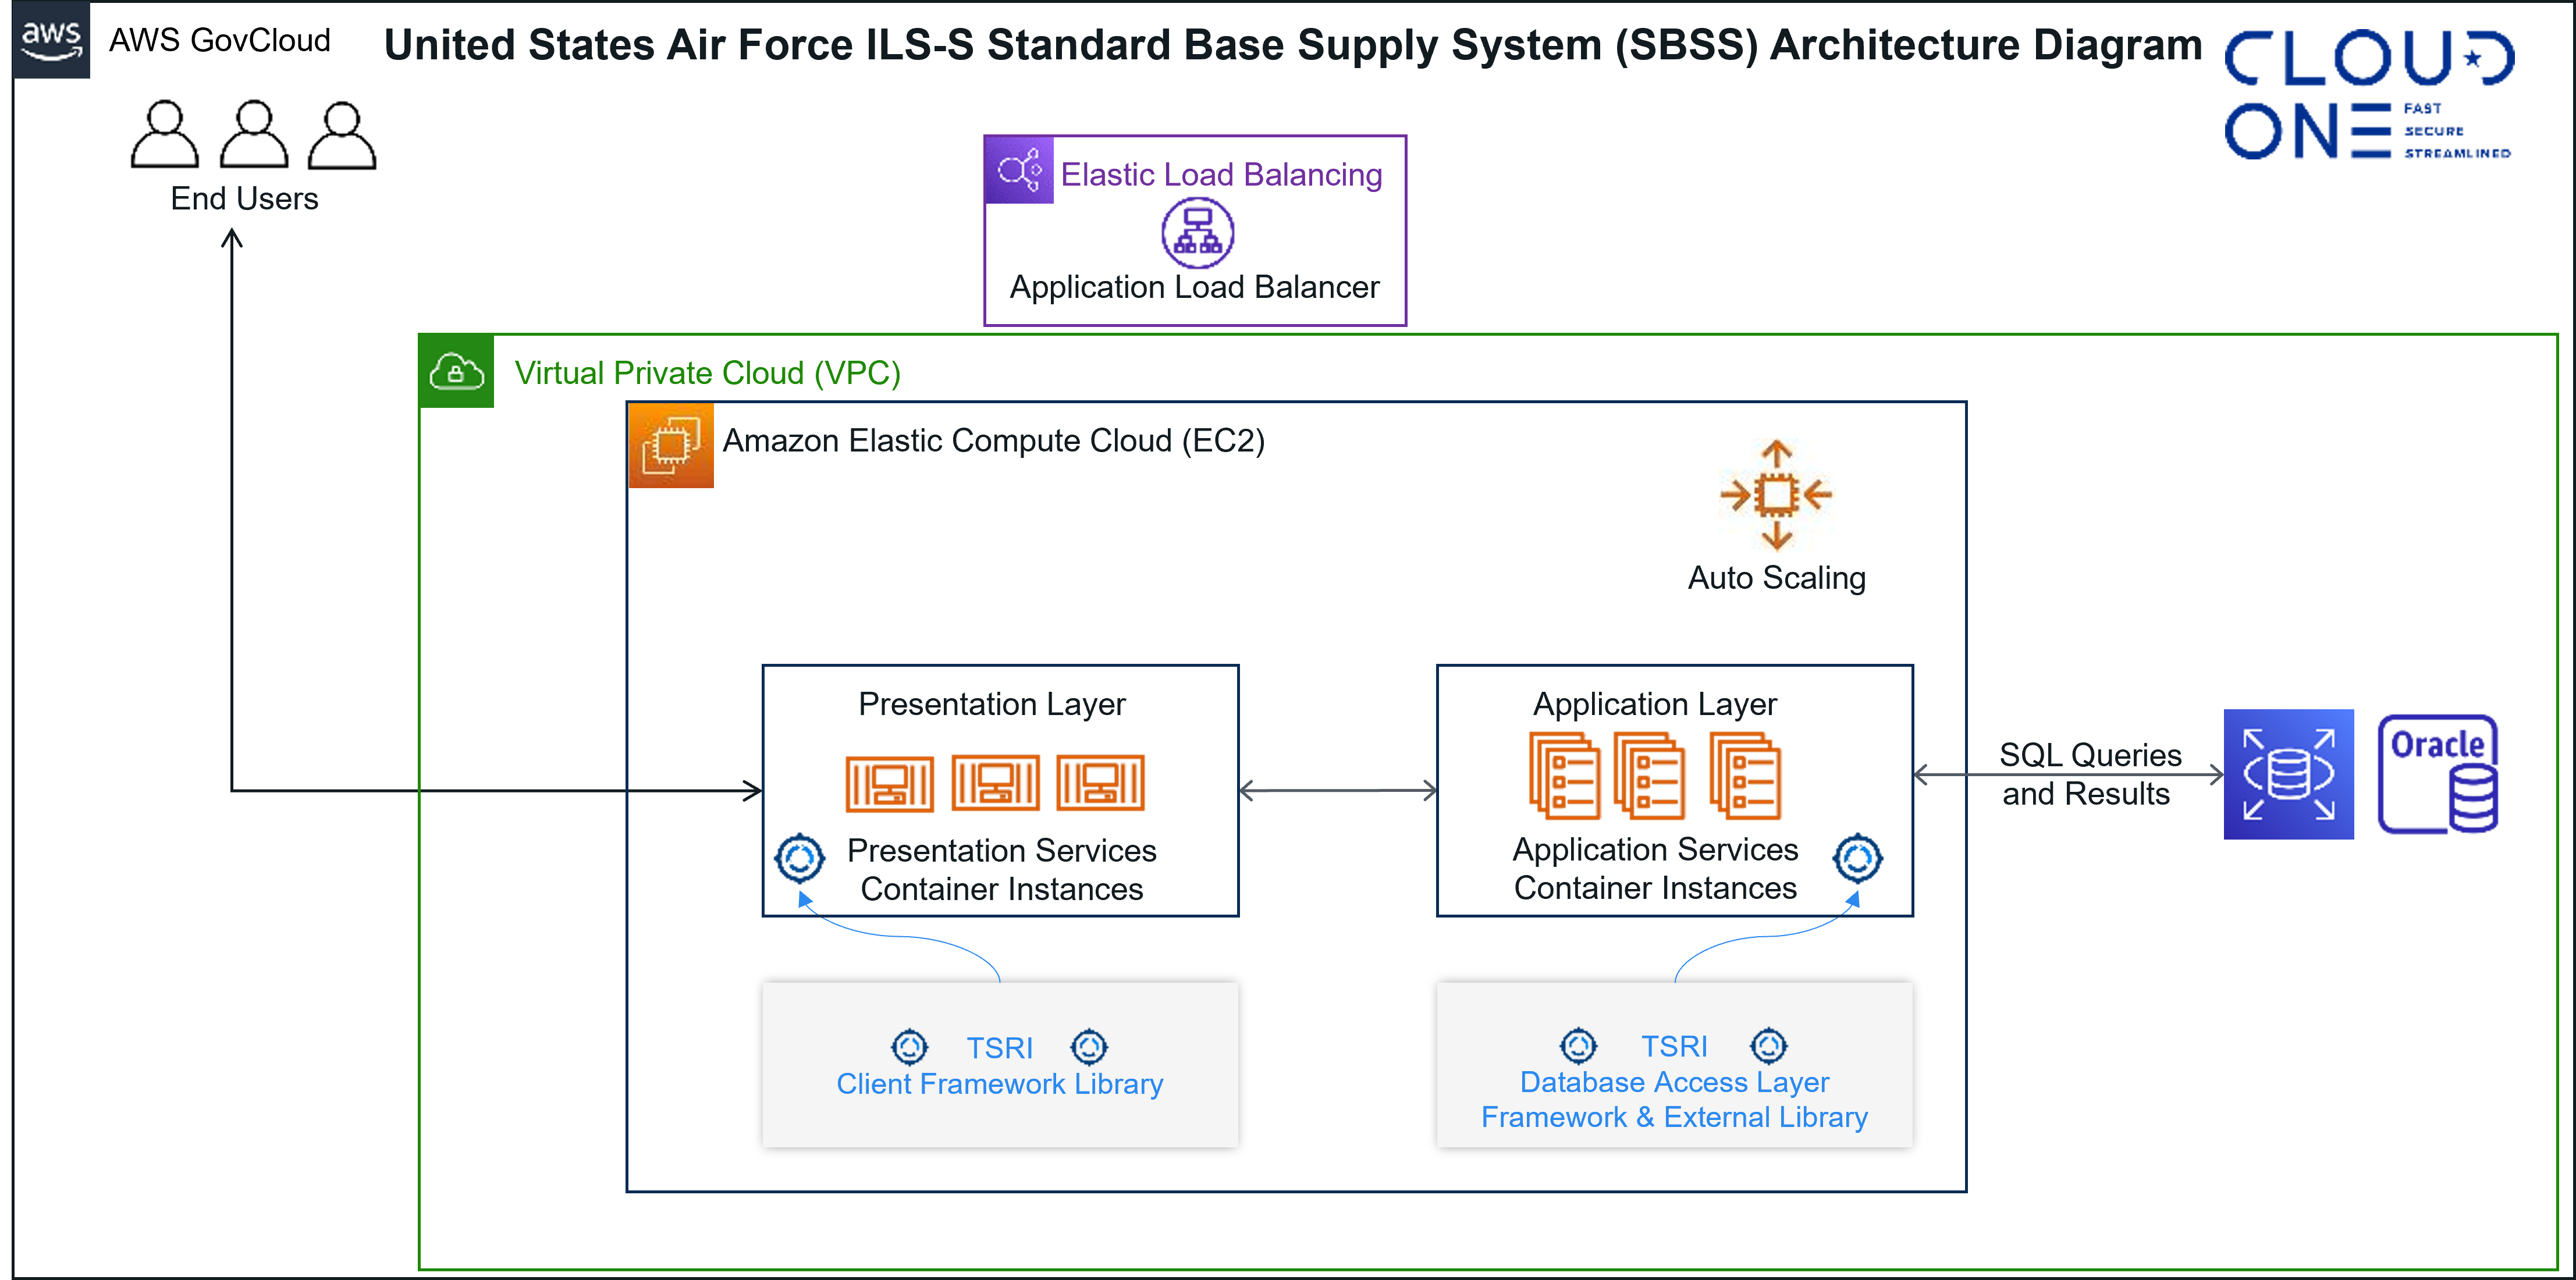 SBSS AWS Target Architecture